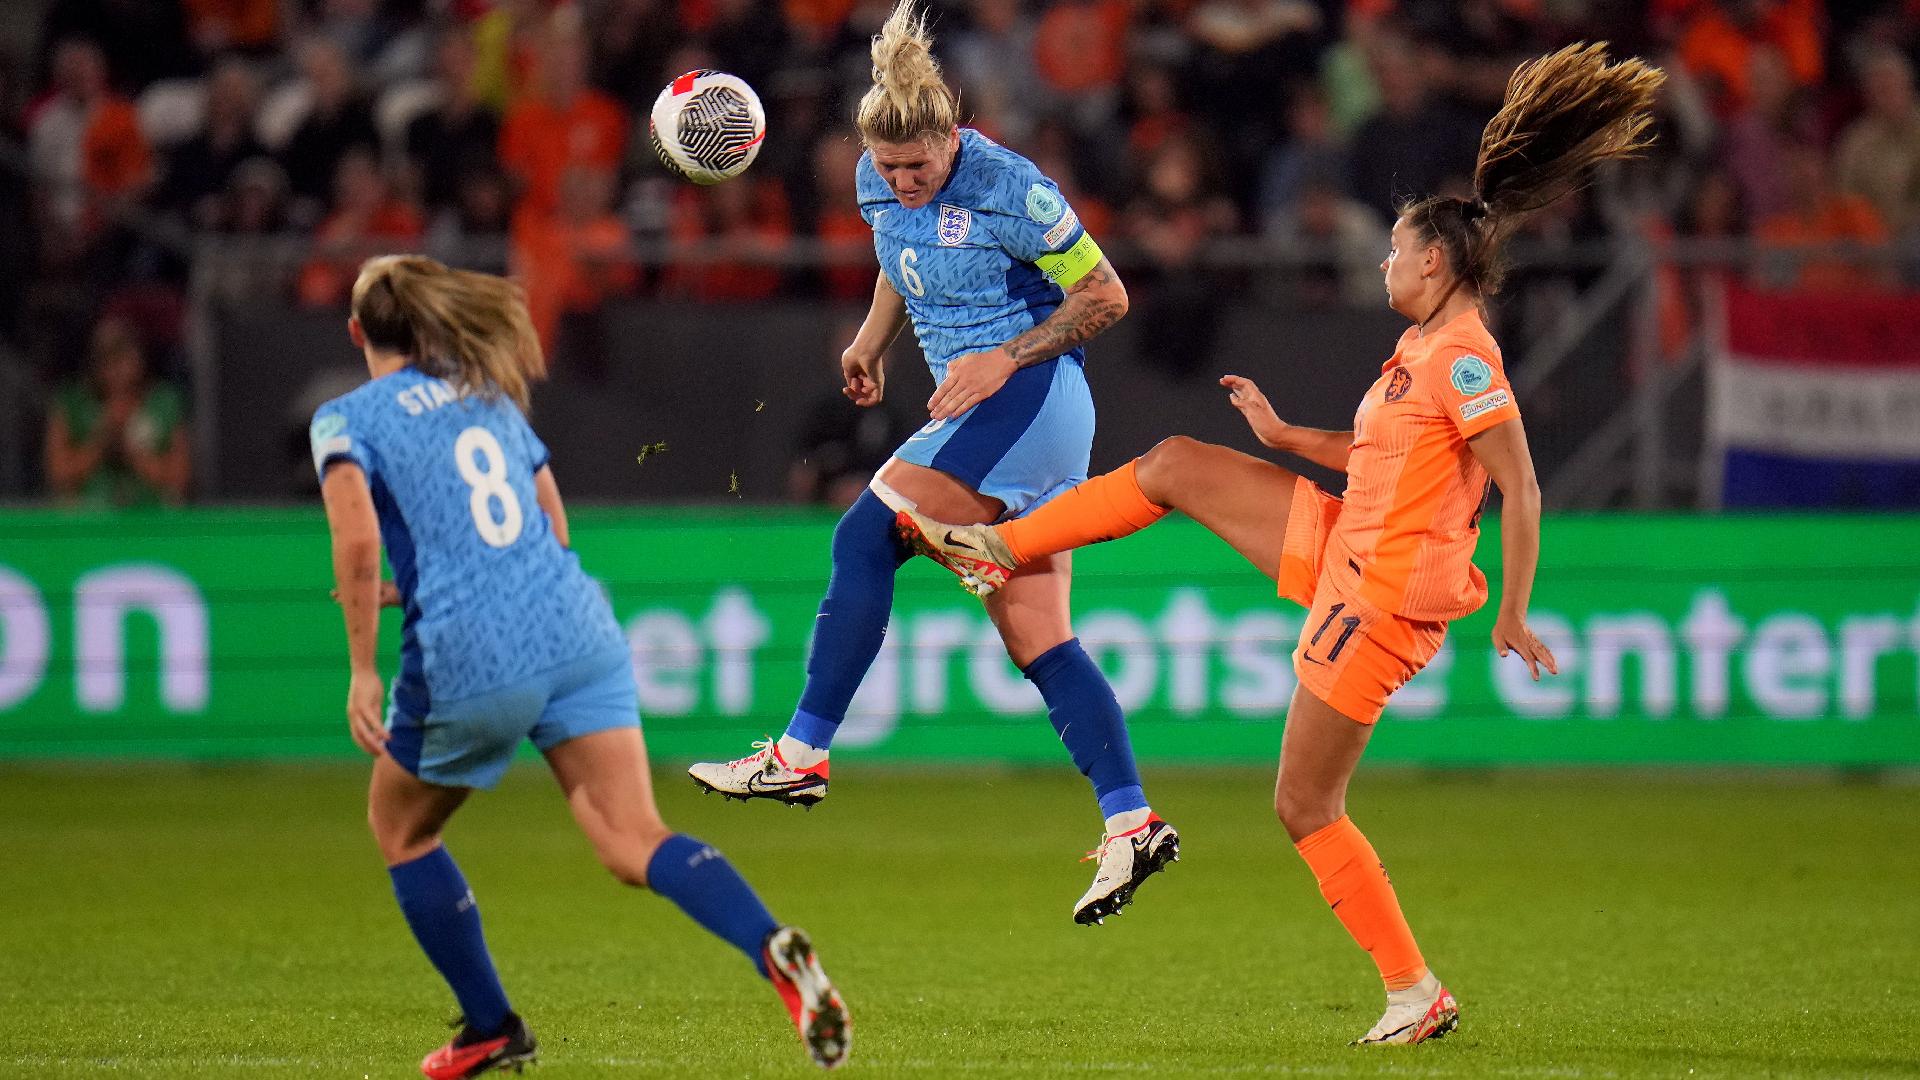 Millie Bright brands lack of VAR ‘mind-blowing’ as England lose to offside goal